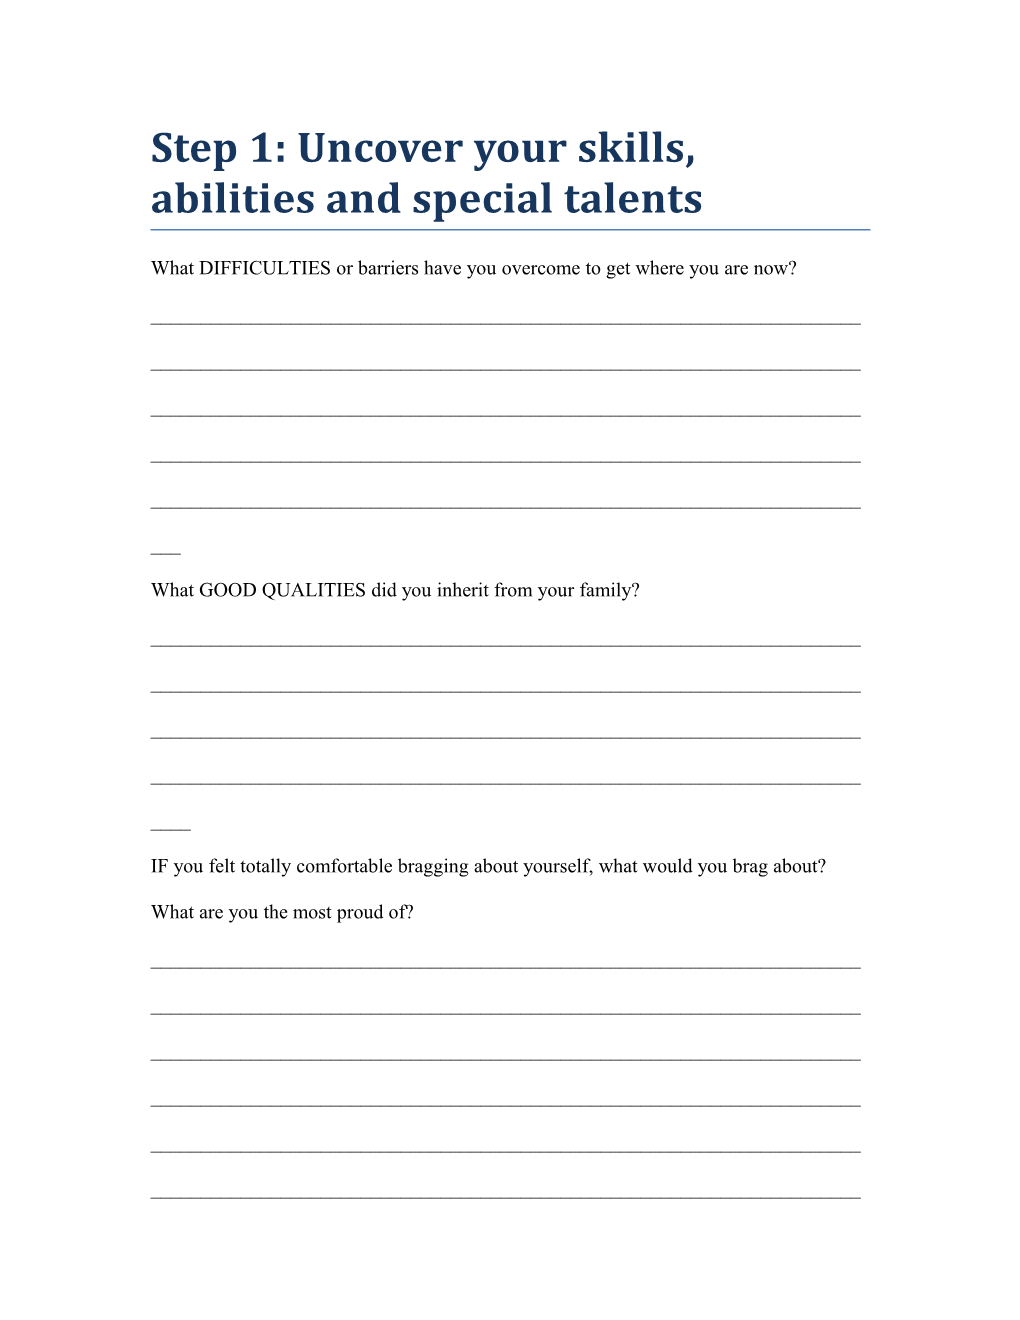 Step 1: Uncover Your Skills, Abilities and Special Talents